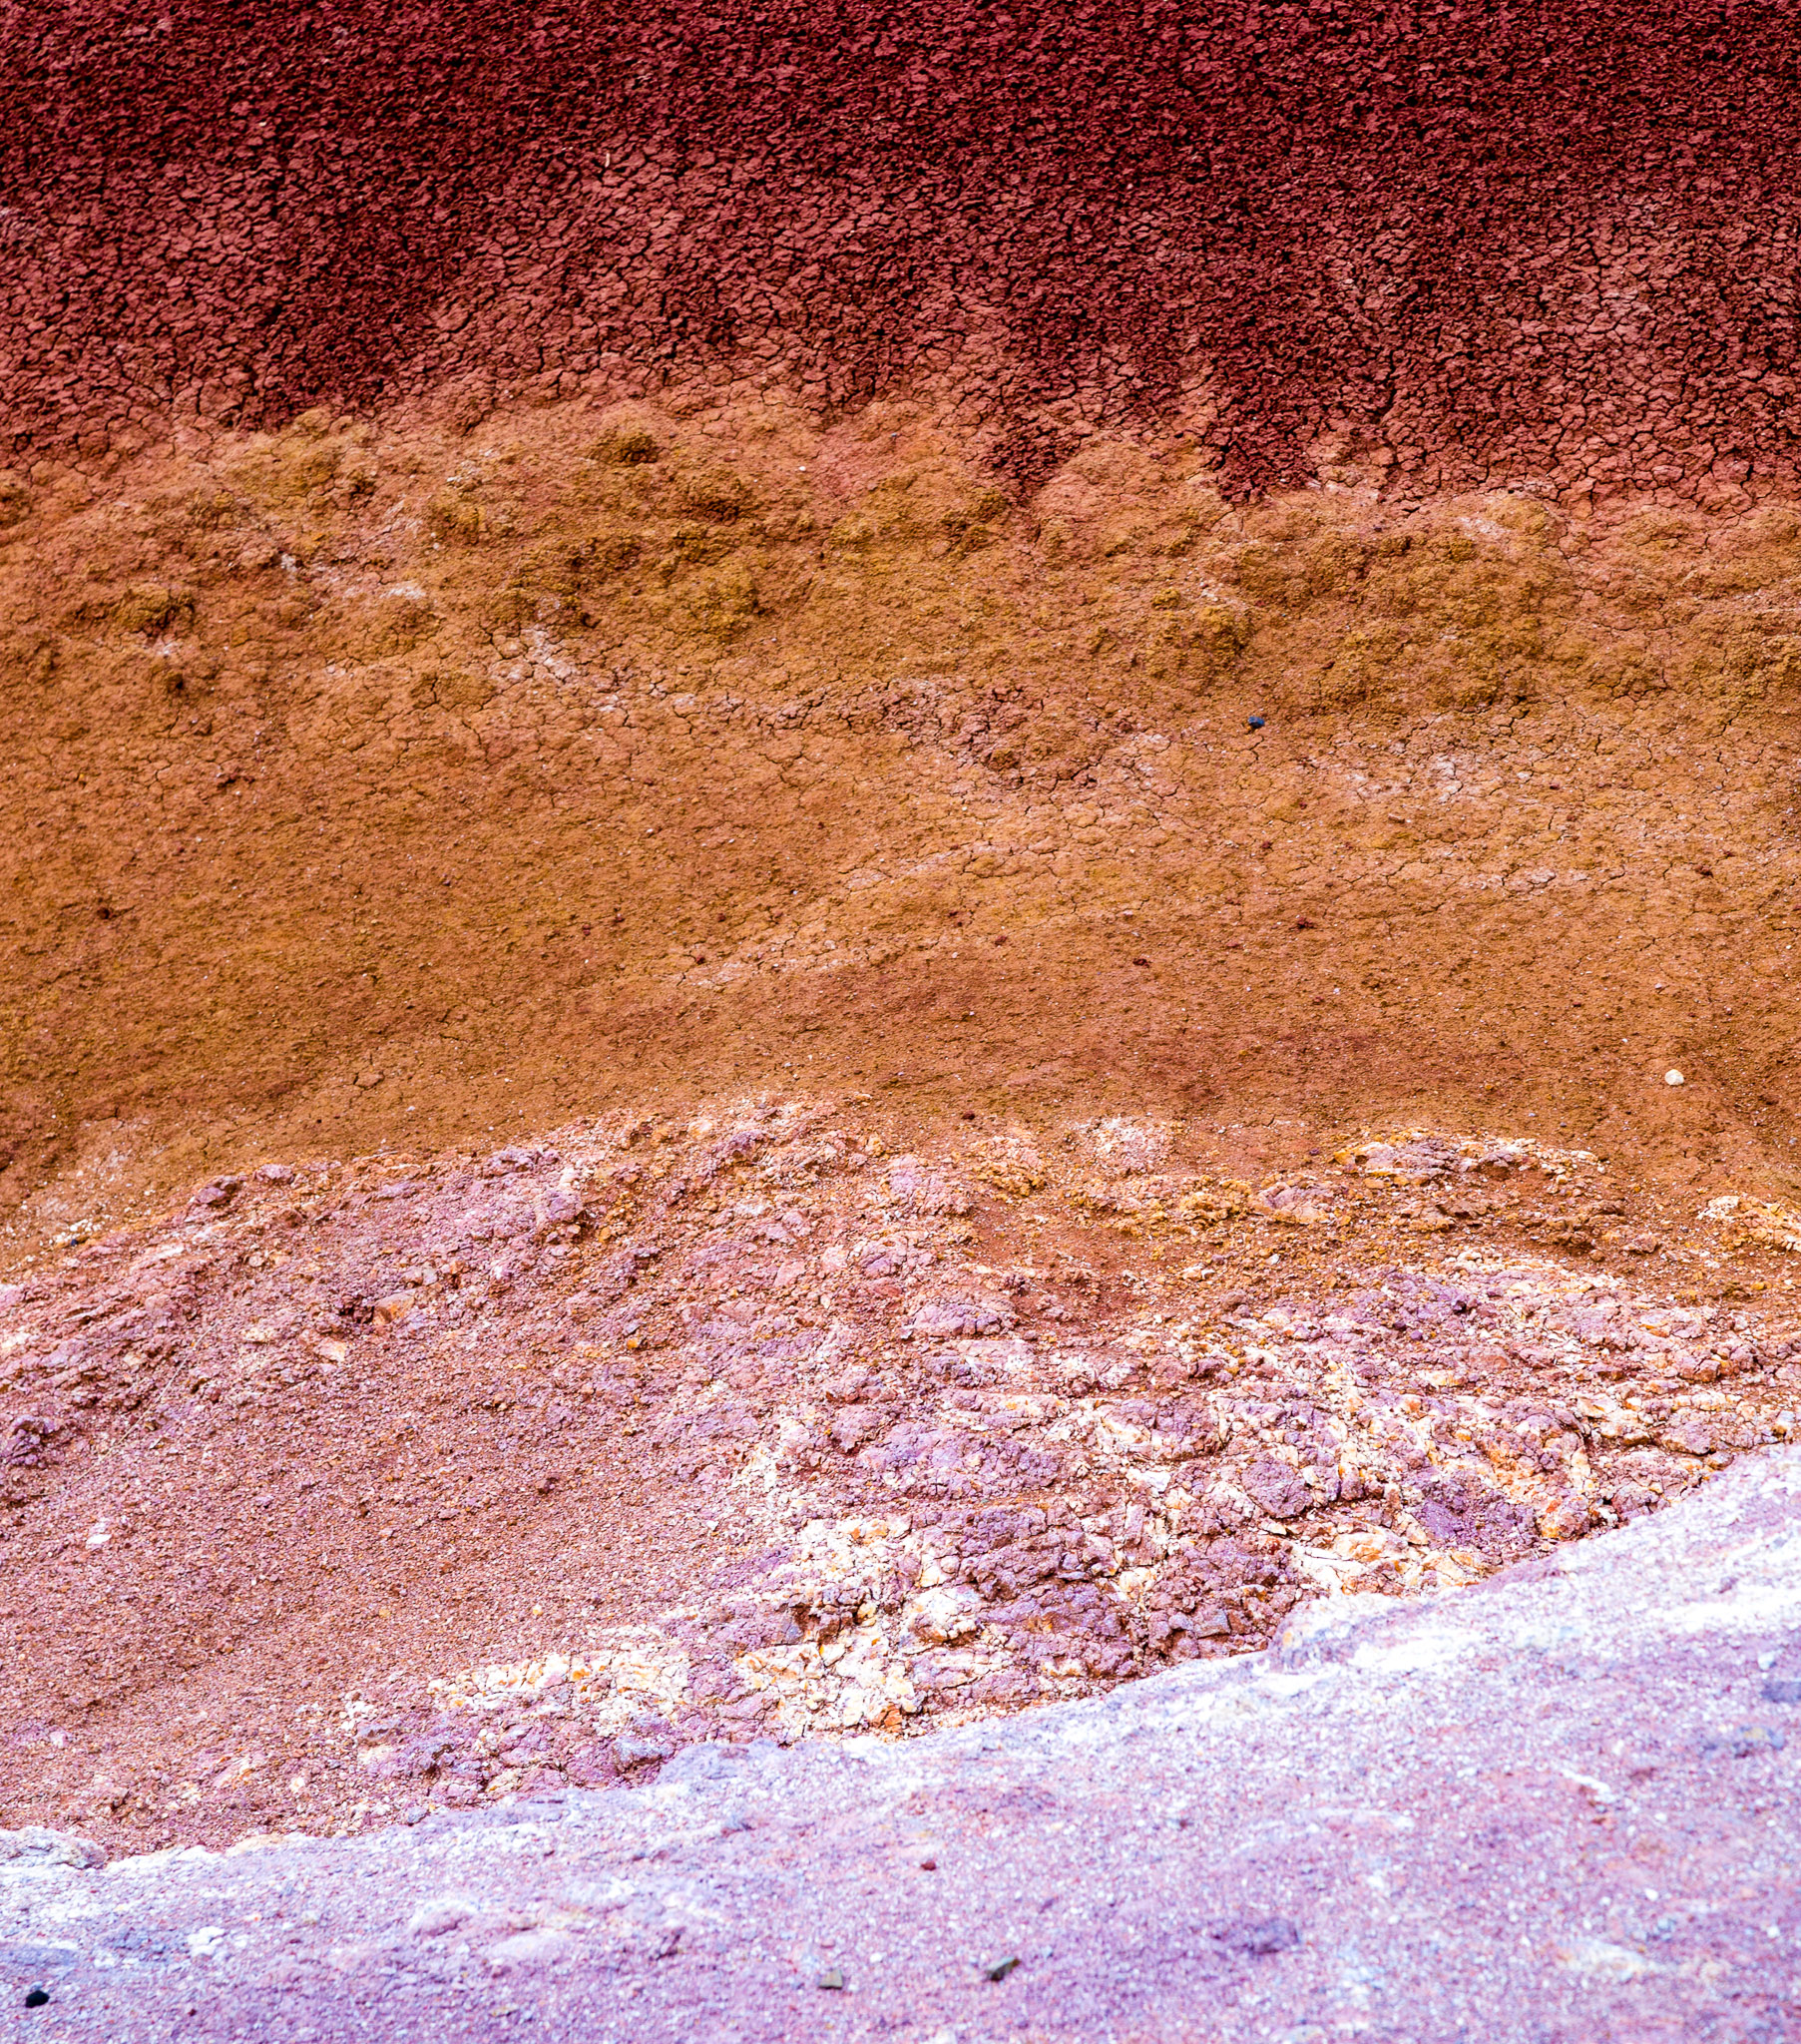 Colored Strata at Oregon's Painted Hills